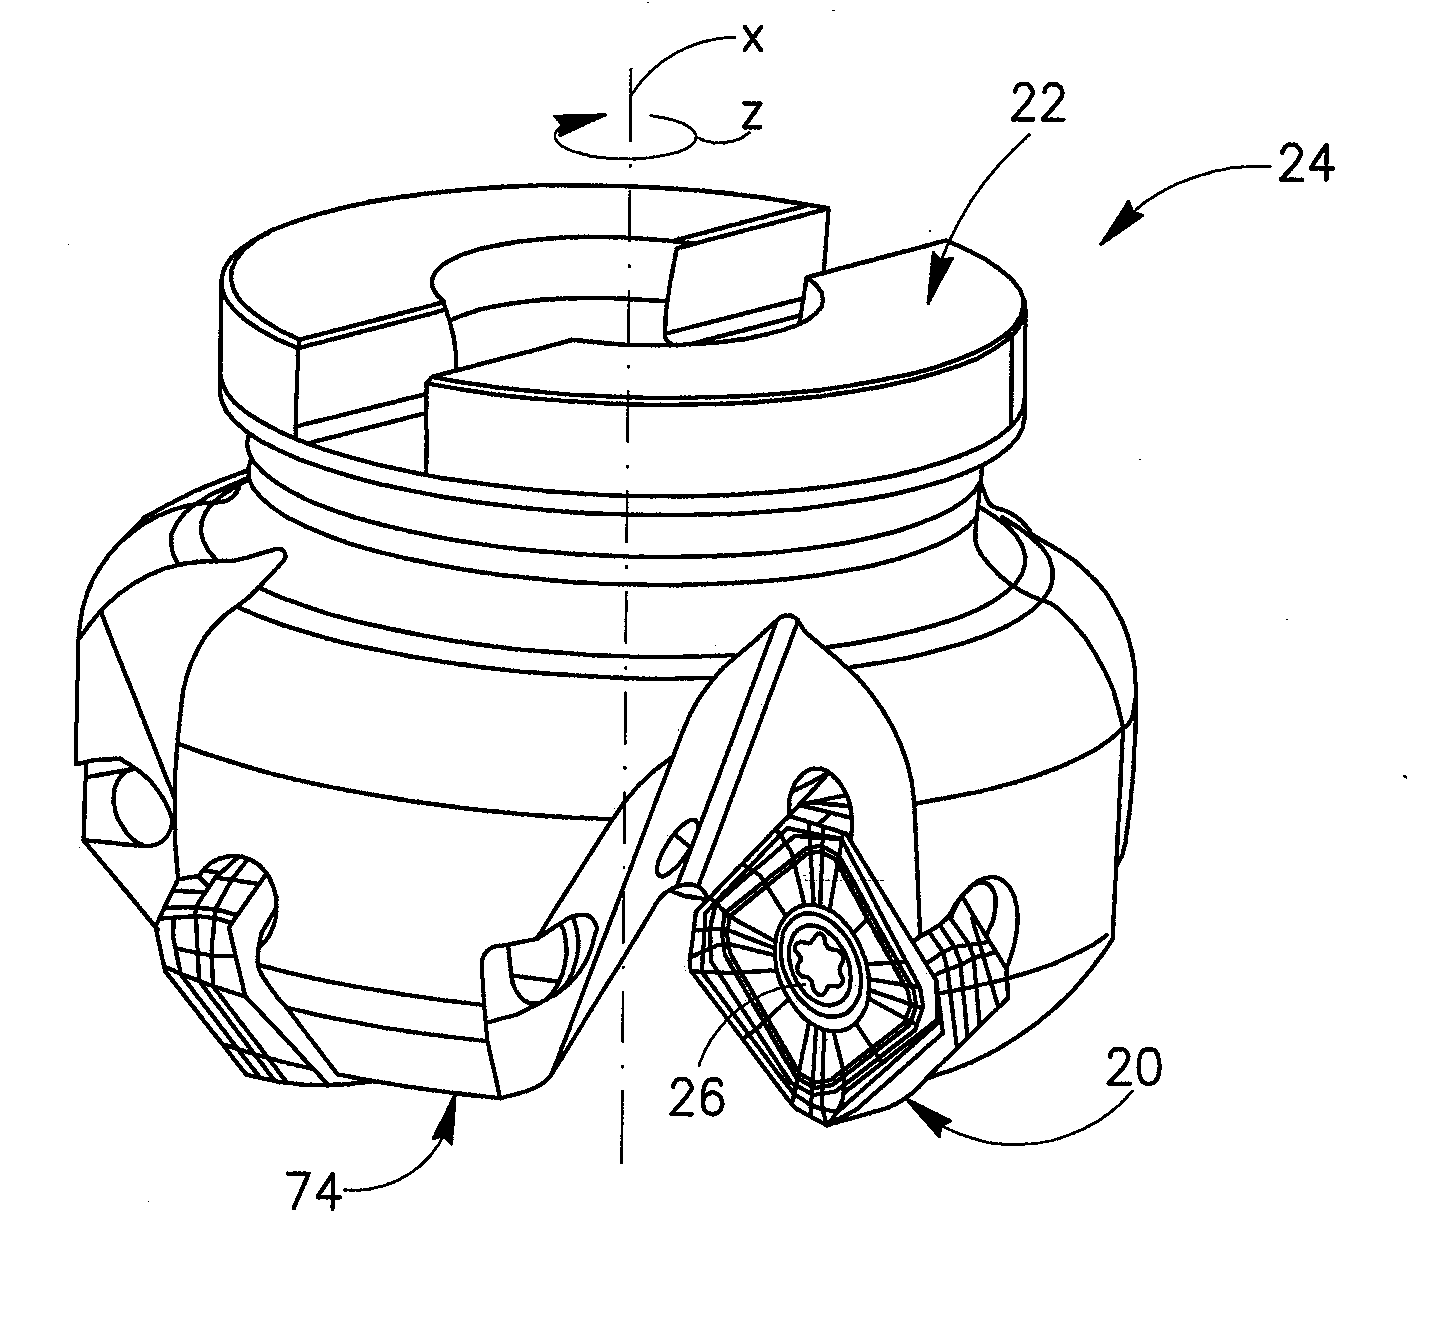 Cutting Insert Having Cylindrically Shaped Side Surface Portions